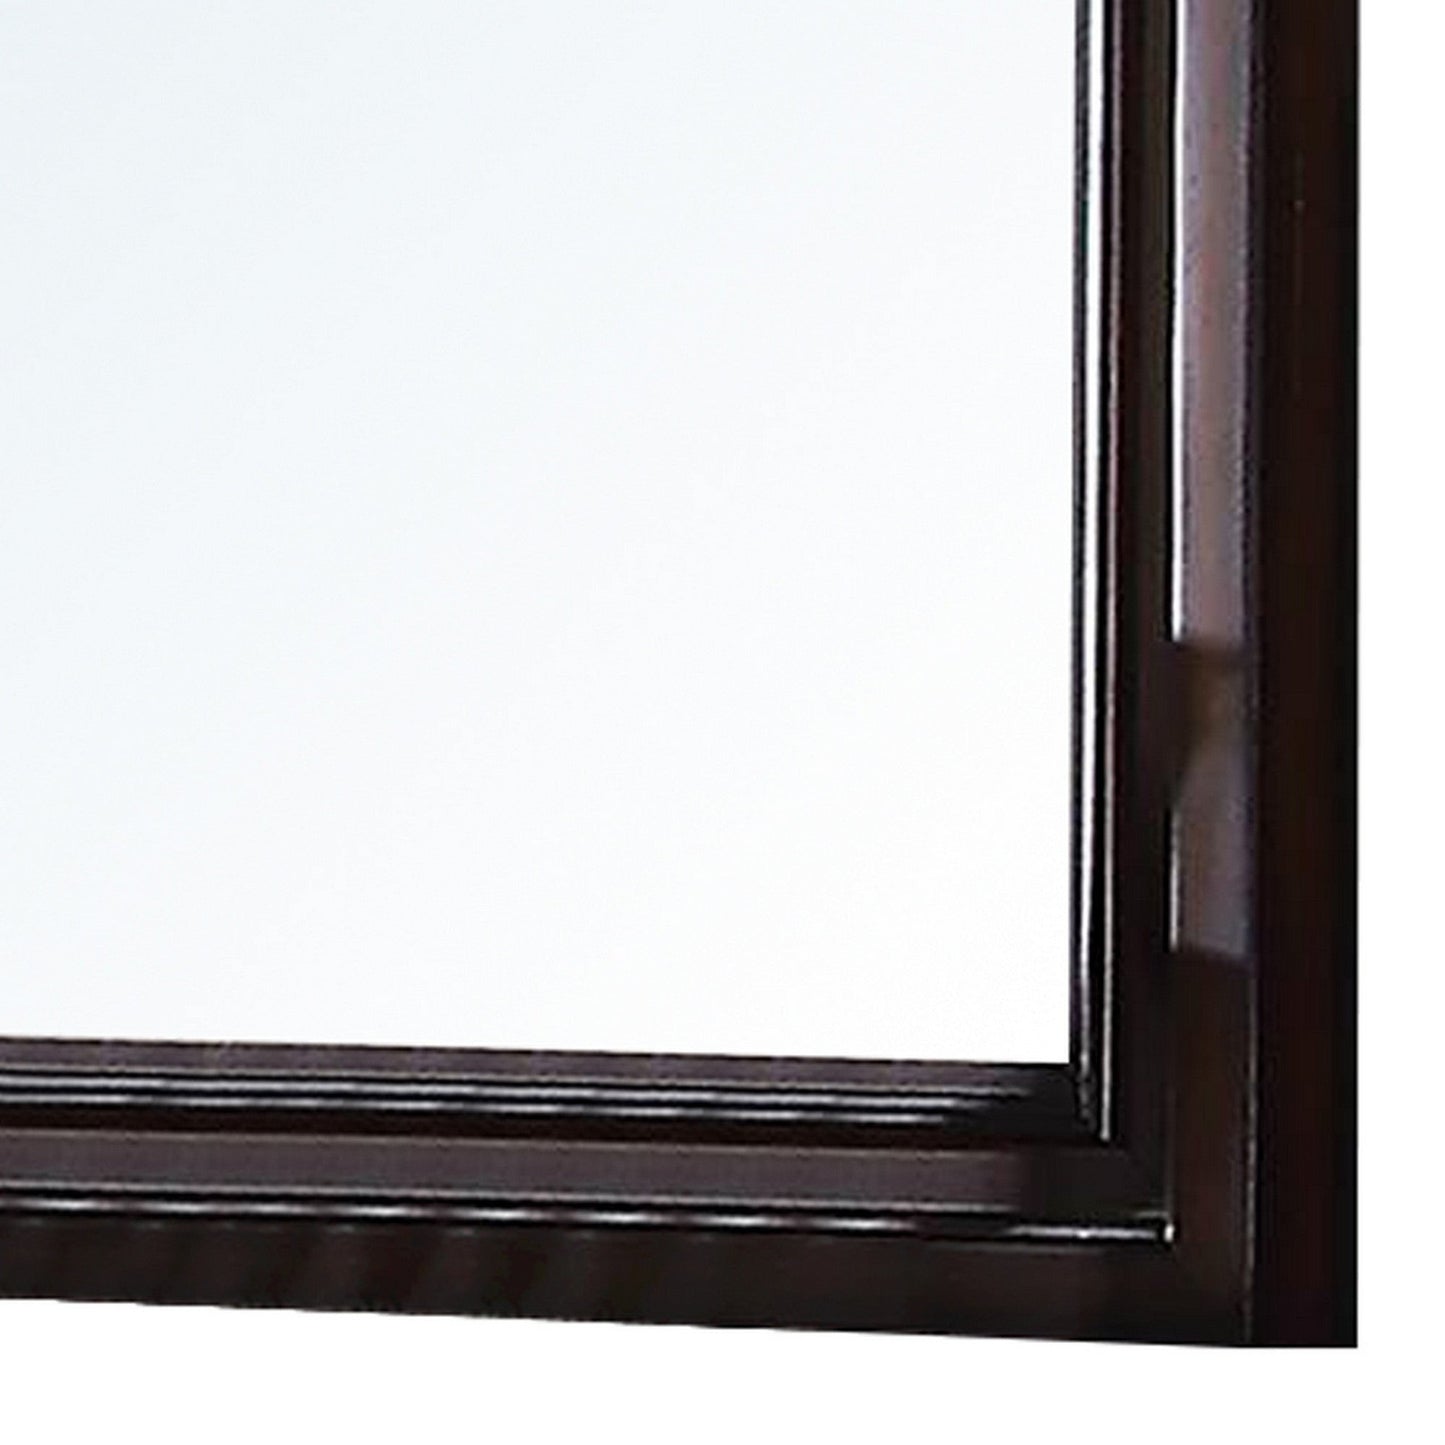 Benzara Brown Wooden Mirror With Raised Frame and Molded Details